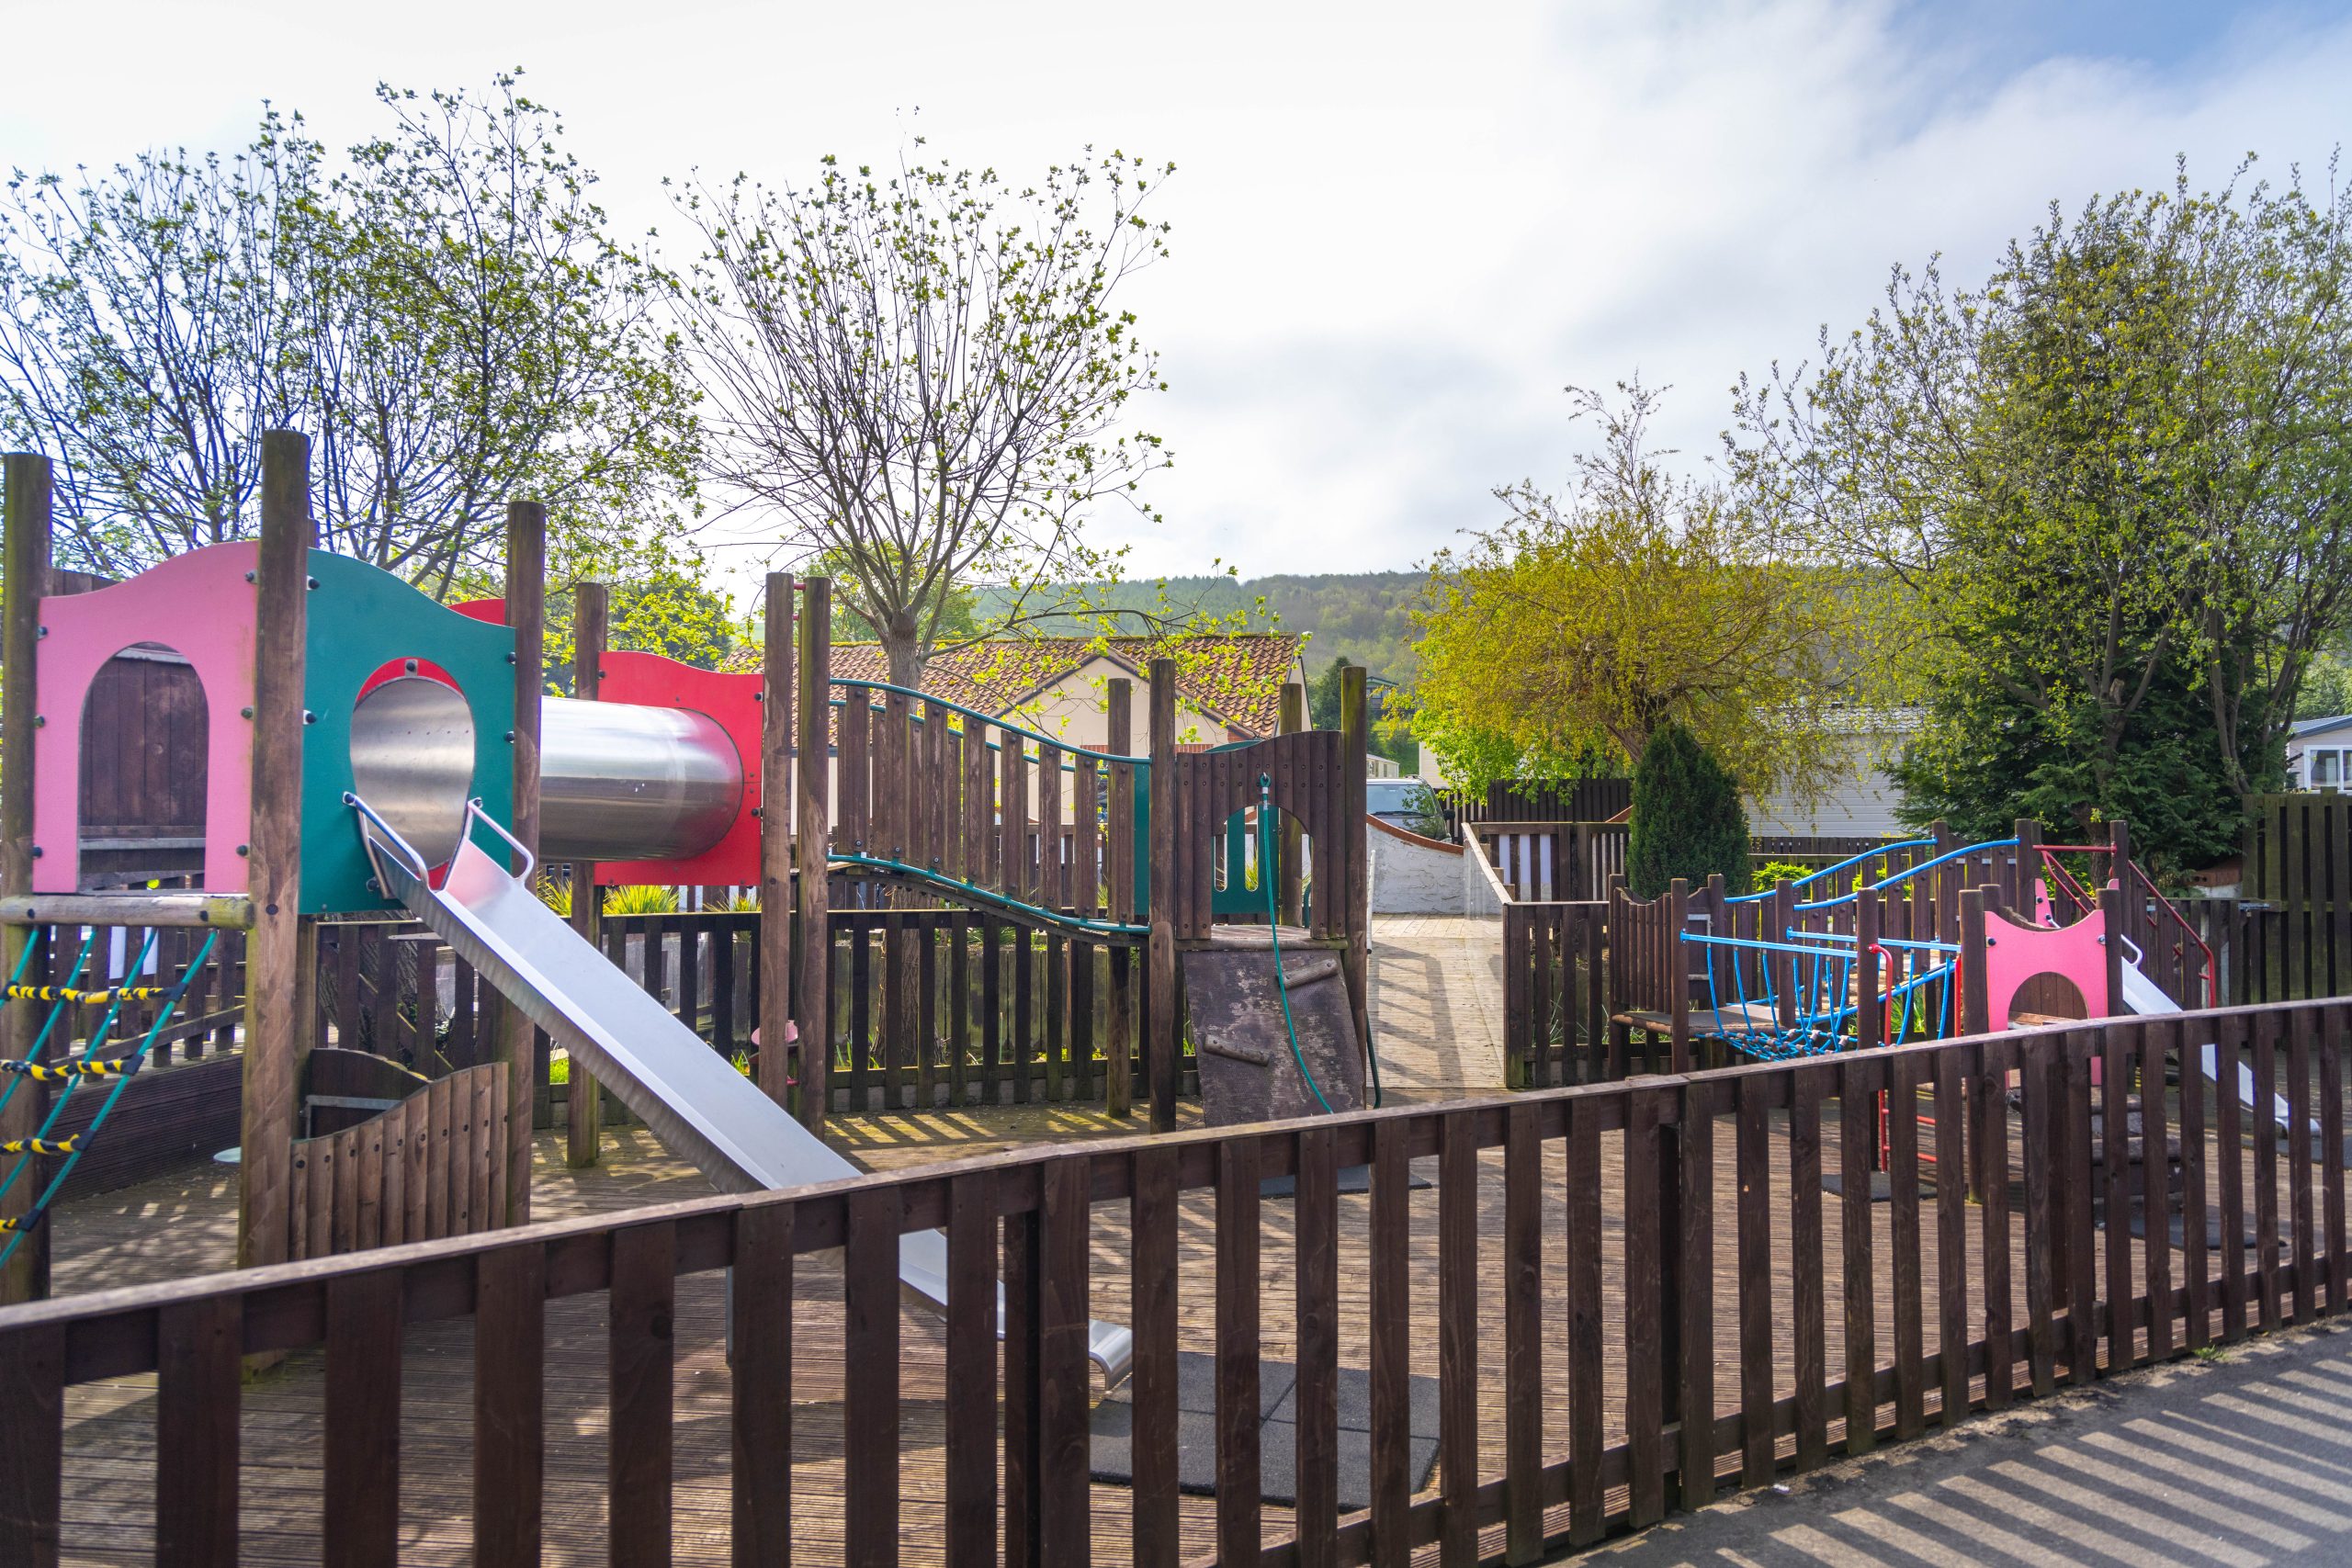 Family Fun - Child-Friendly Facilities at Inspire Leisure